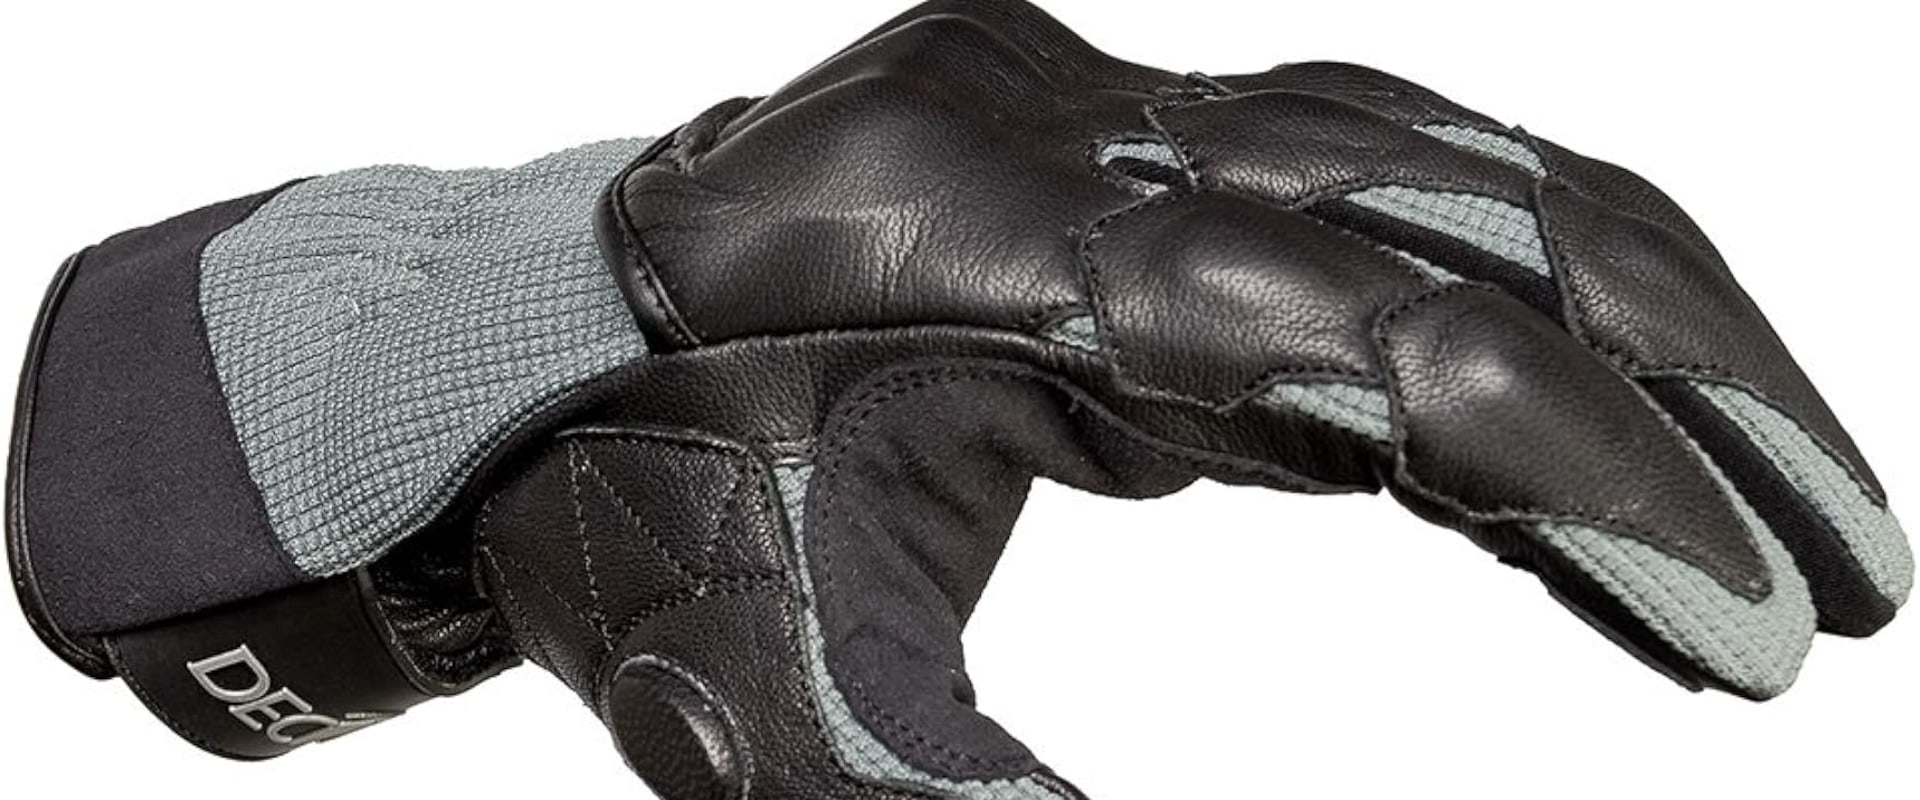 Everything You Need to Know About Gloves for Motorsports